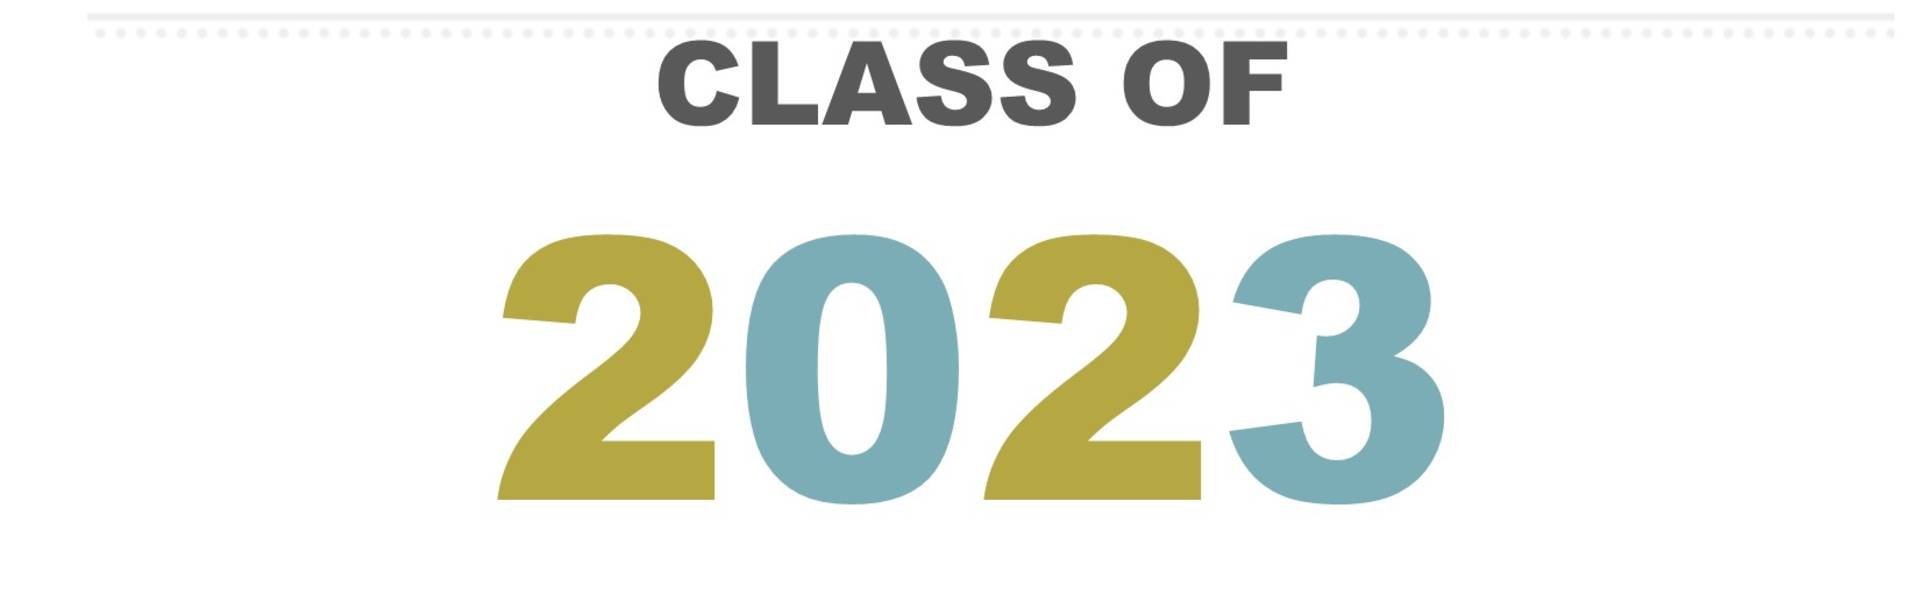 College of Business Class of 2023